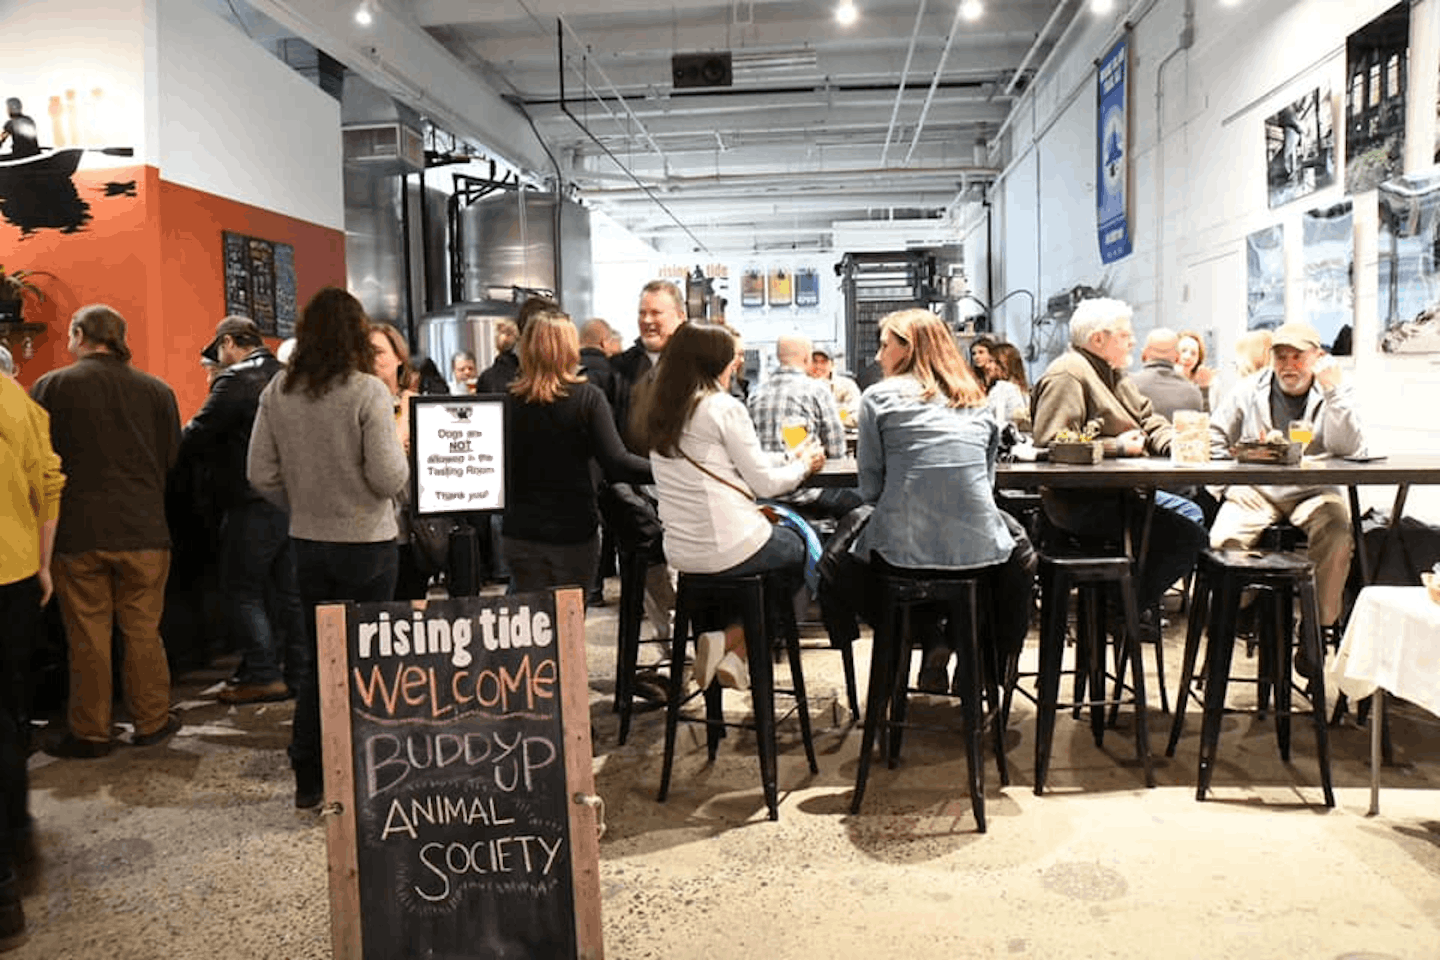 Photograph of the interior of the tasting room.  There is a chalkbaord sign that ready Buddy Up Animal Society in the foreground and people mingling at the bar and tables in the background